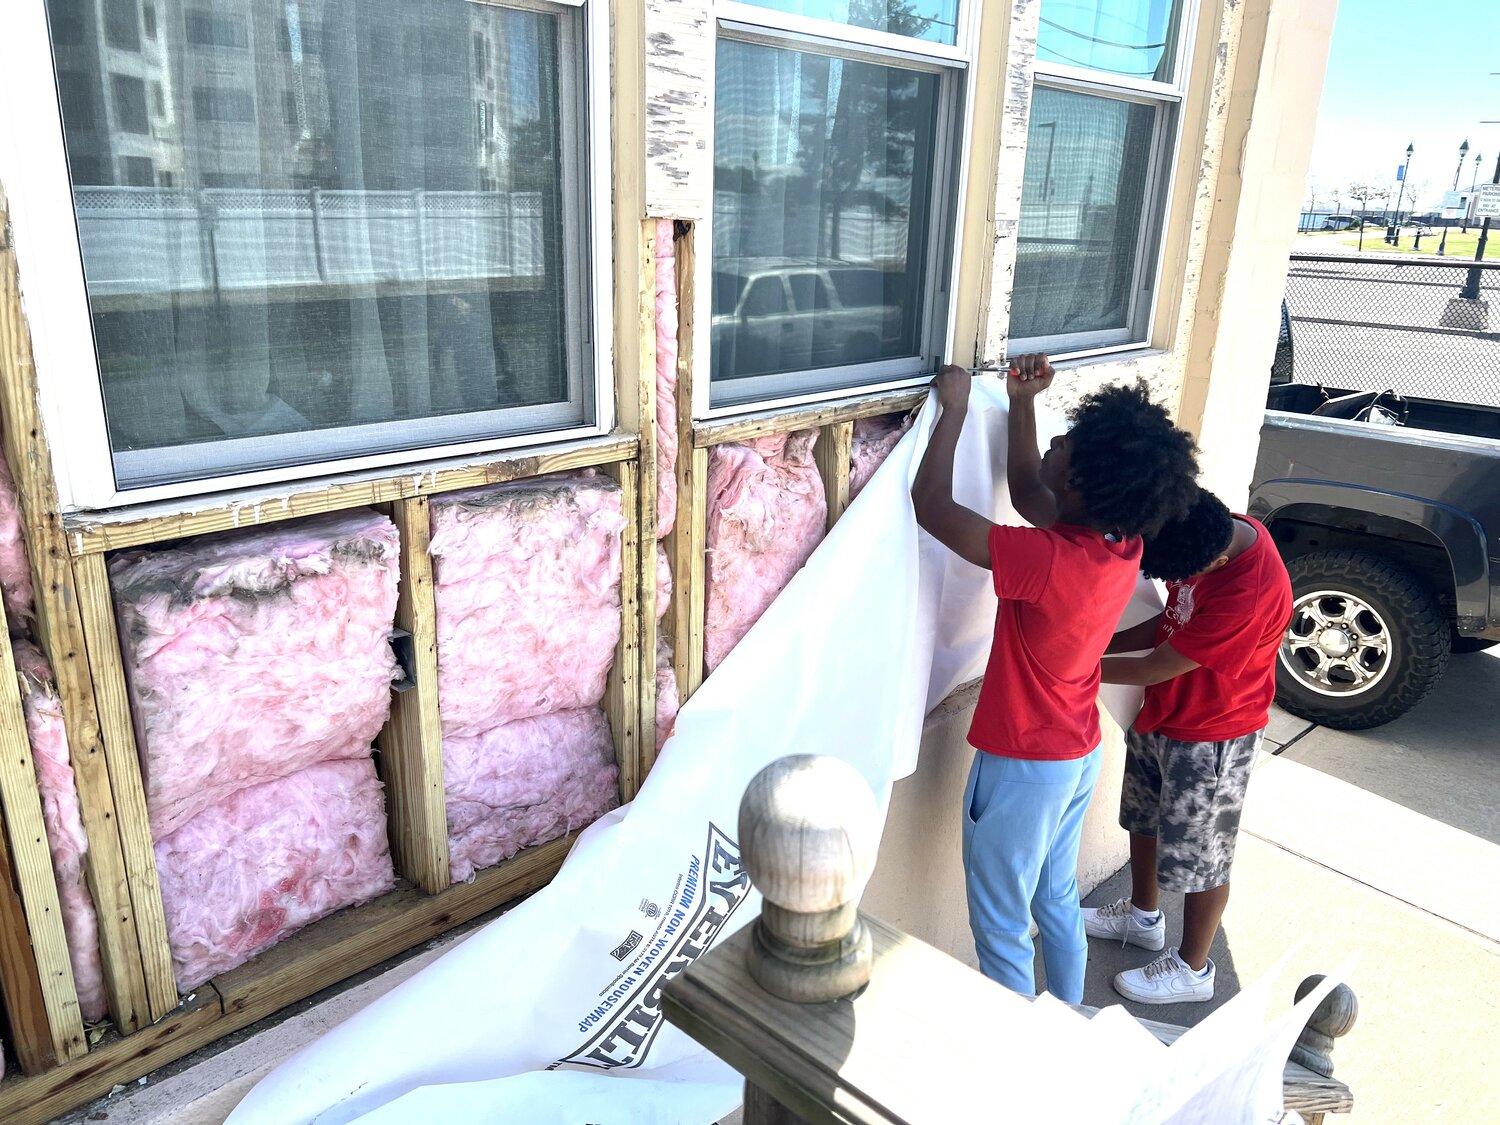 The brothers removed a special plastic covering from the fascia of the Post 342 building, exposing the still-useful fiberglass insulation, which Jeremiah will augment during the renovation of the wall.